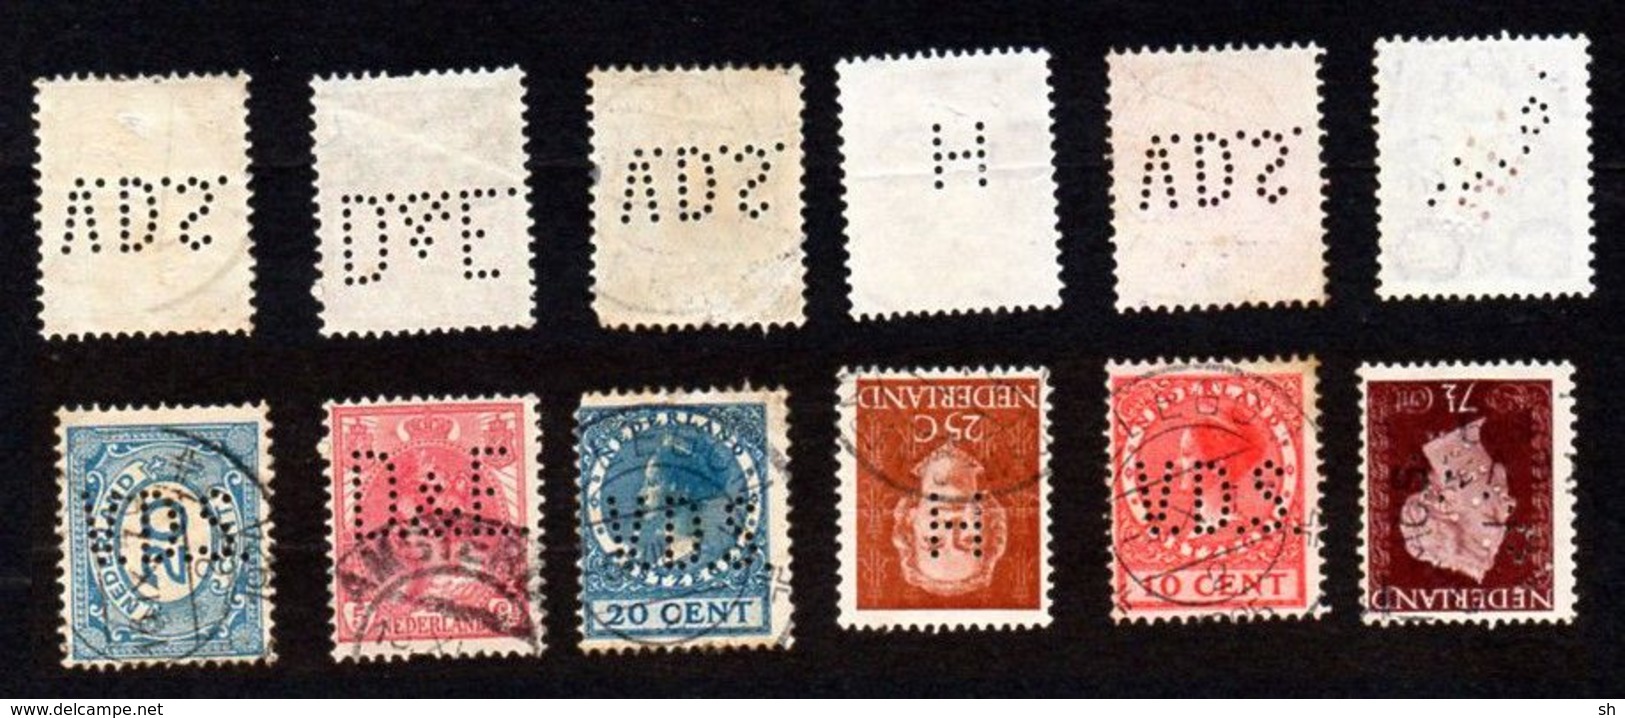 Perfins - Perforé - Lochung - 6 Timbres - Pays-Bas  - Nederland - Netherland - Perfins